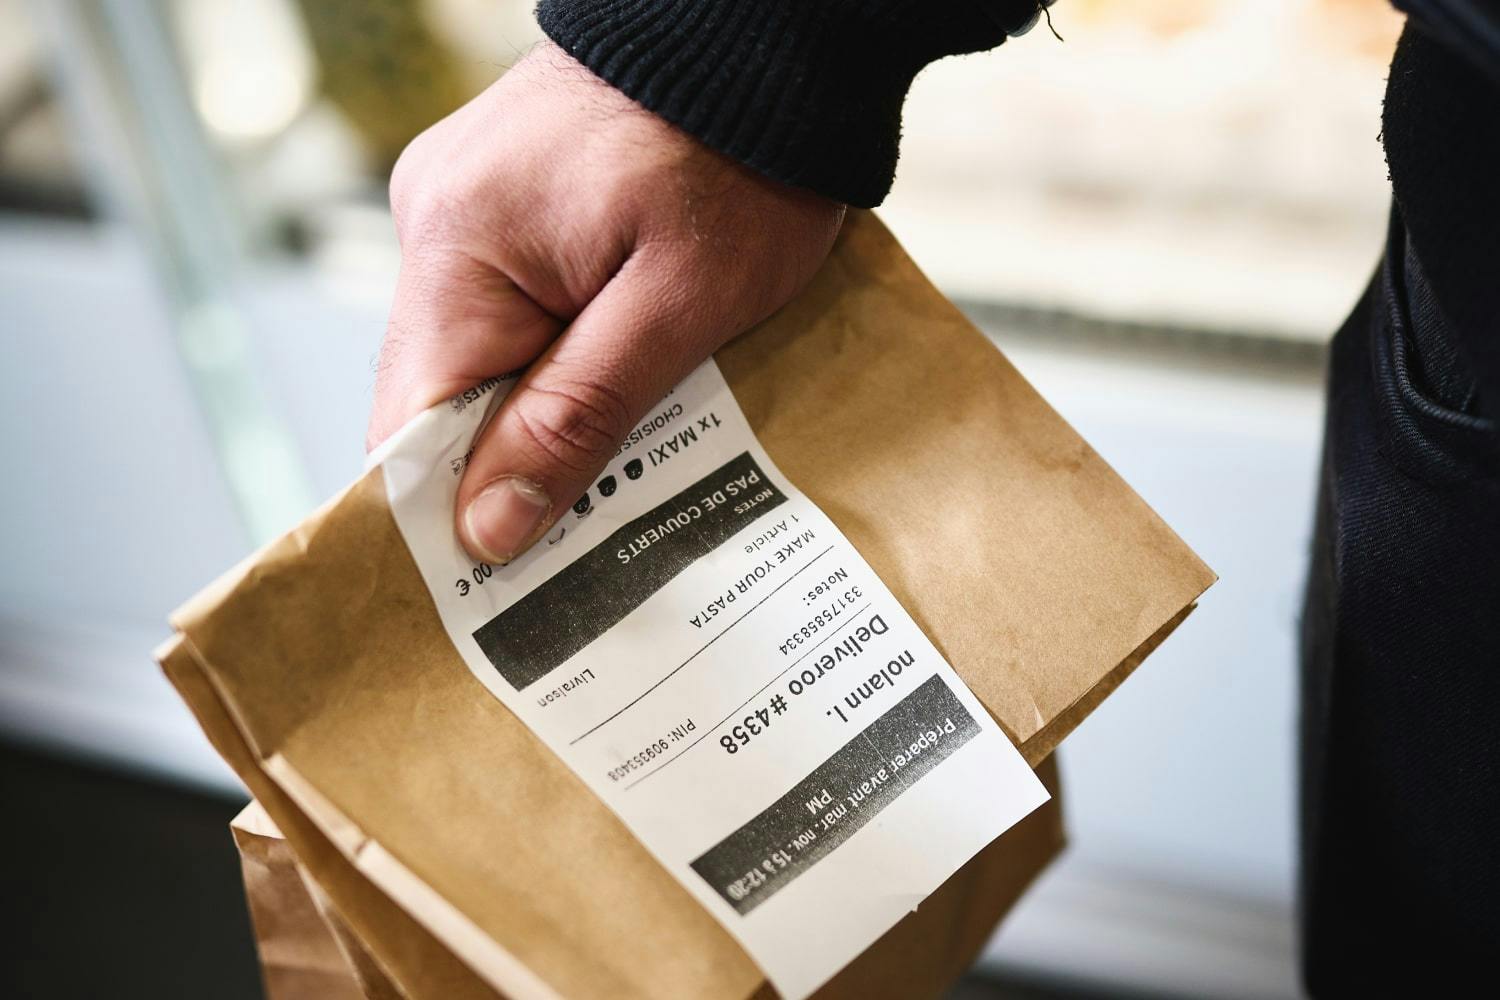 Image of a person holding a food delivery package with the receipt on the top